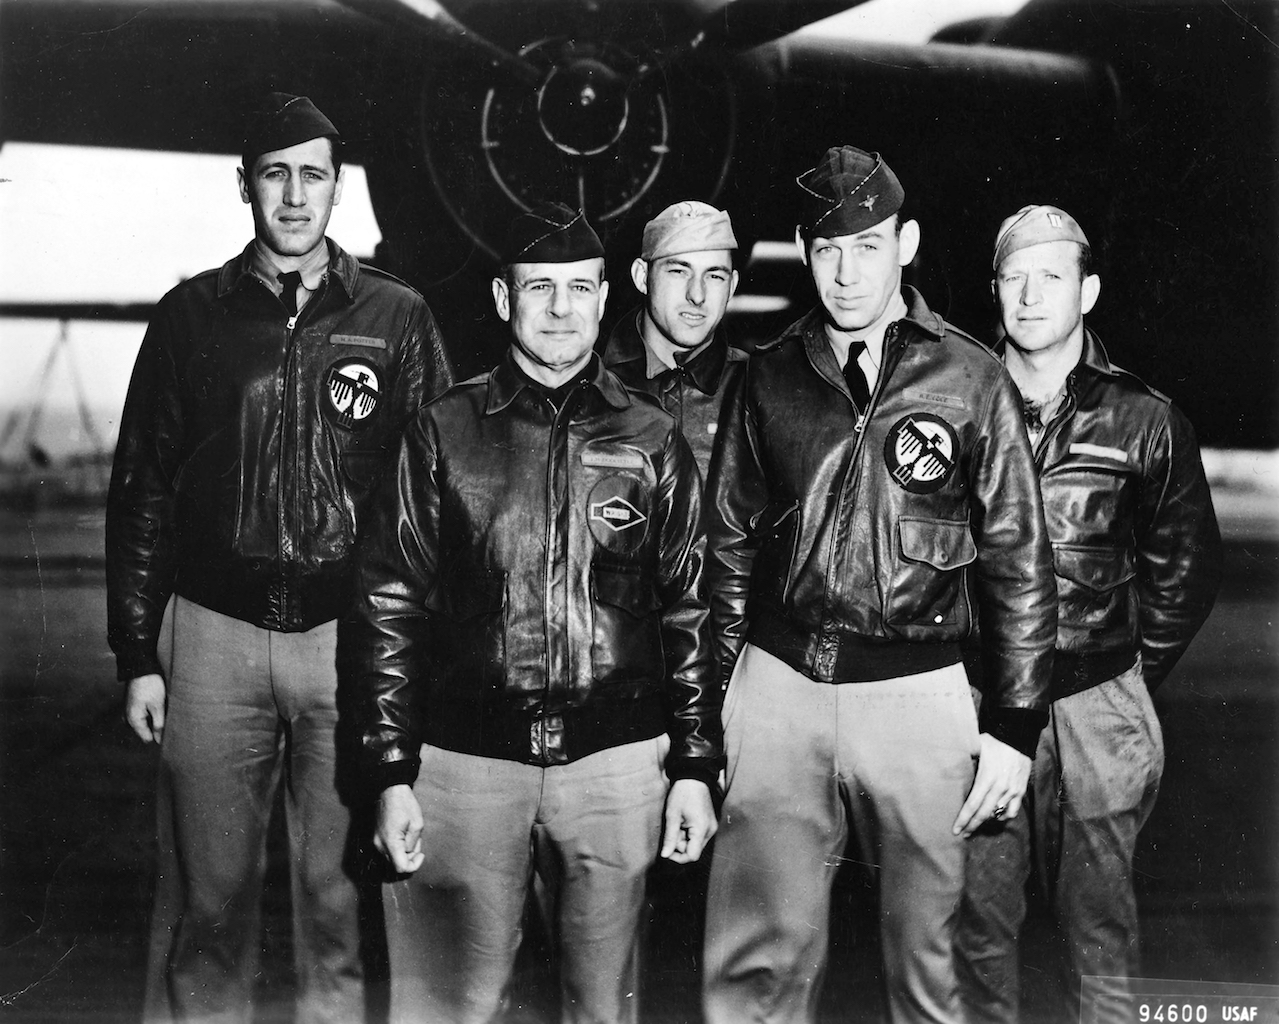 The crew of Doolittle Raiders aircraft #1. Jimmy Doolittle is second from left; Dick Cole is co-pilot and second from right.